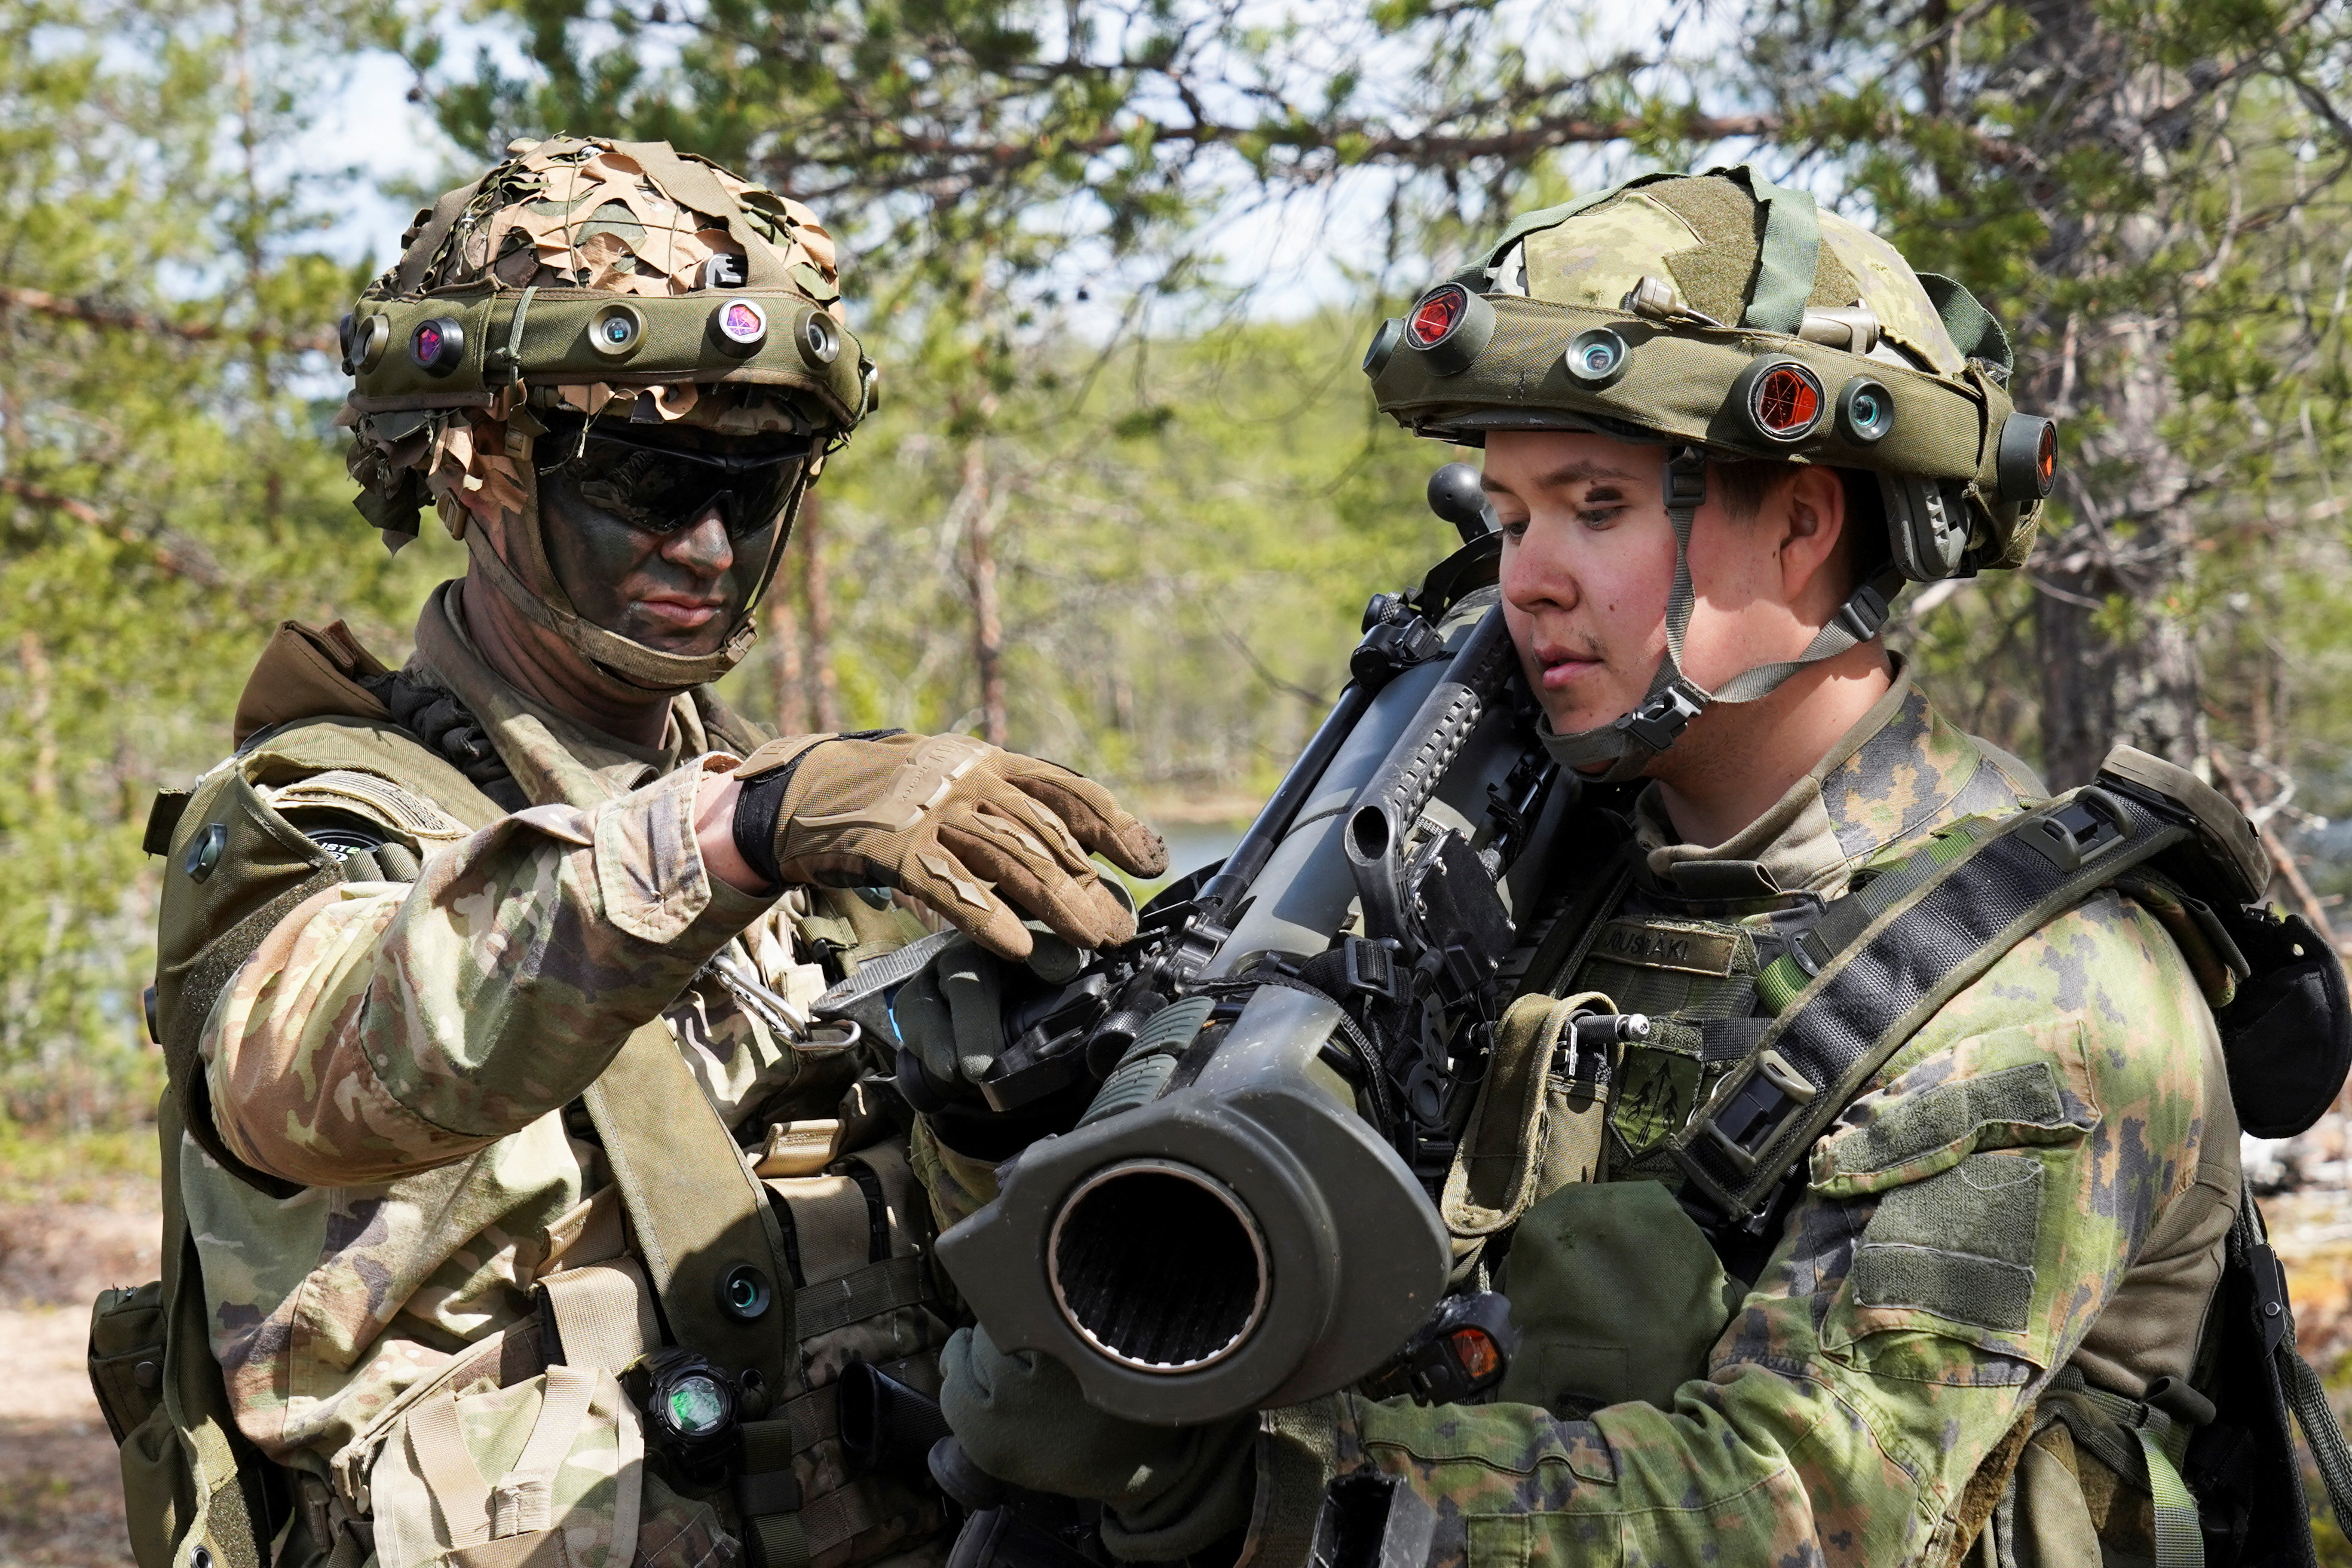 Finland hosts its first military exercise as a NATO member in the High North above the Arctic Circle